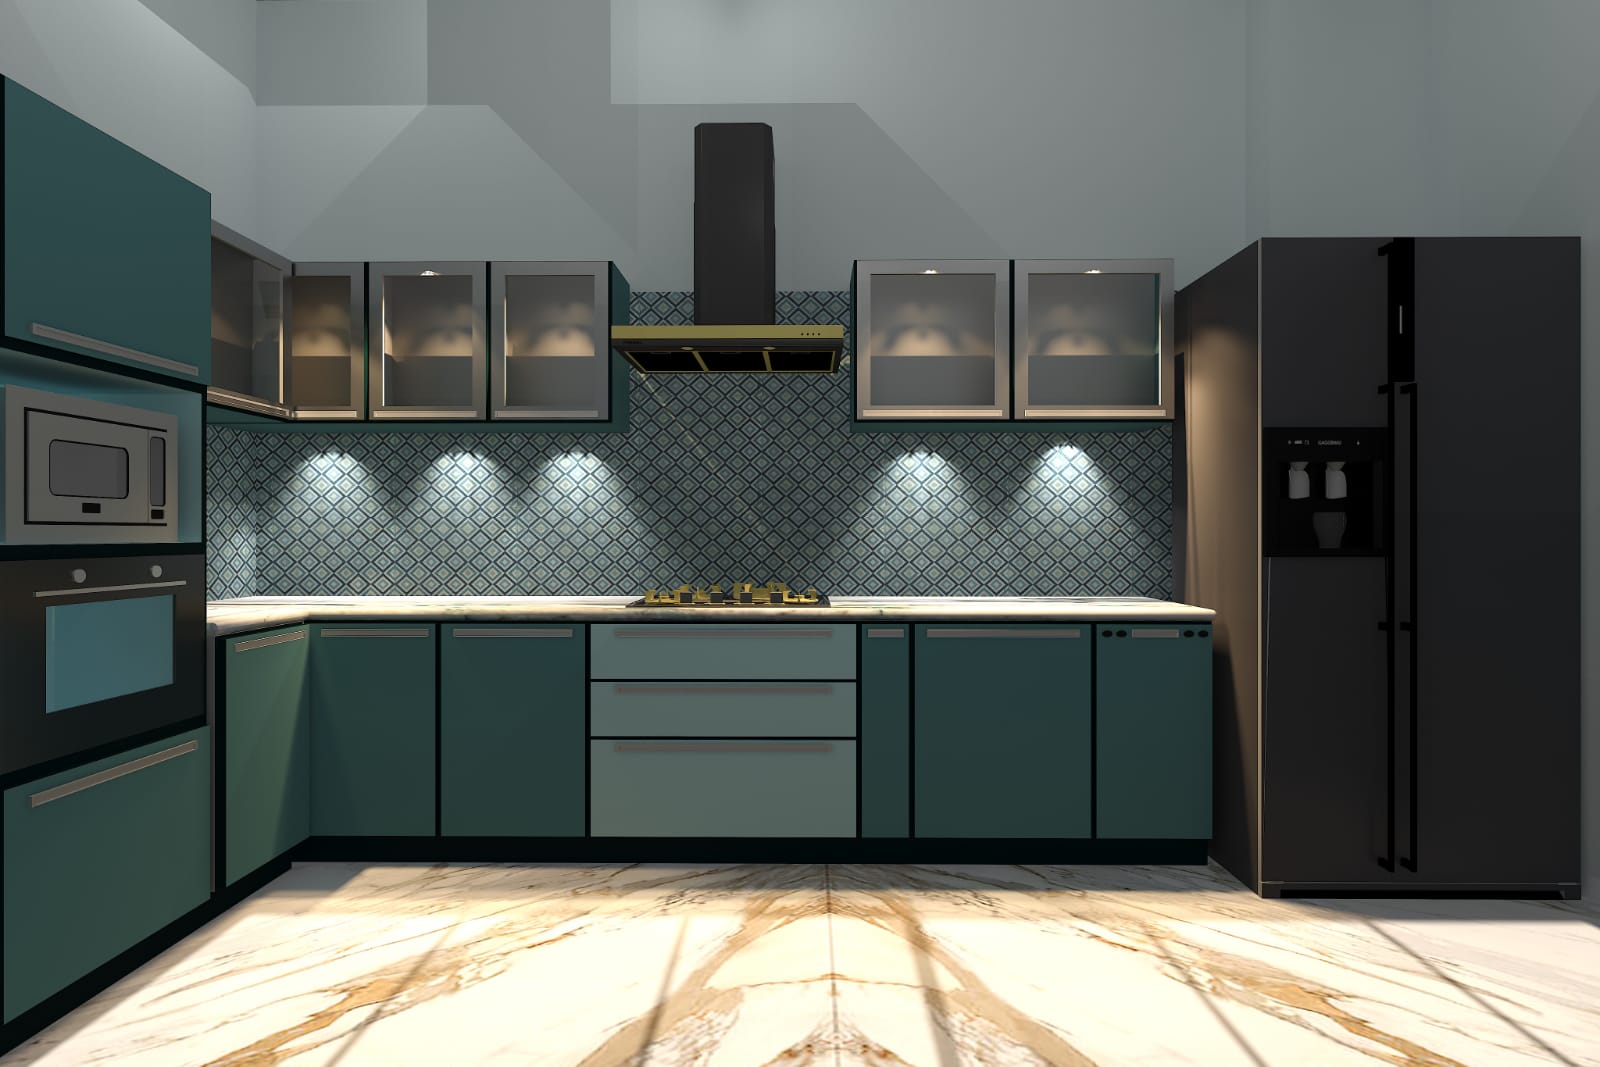 L shaped modular kitchen-Colored Stainless Steel Modular kitchen-Modern L shaped stainless steel kitchen